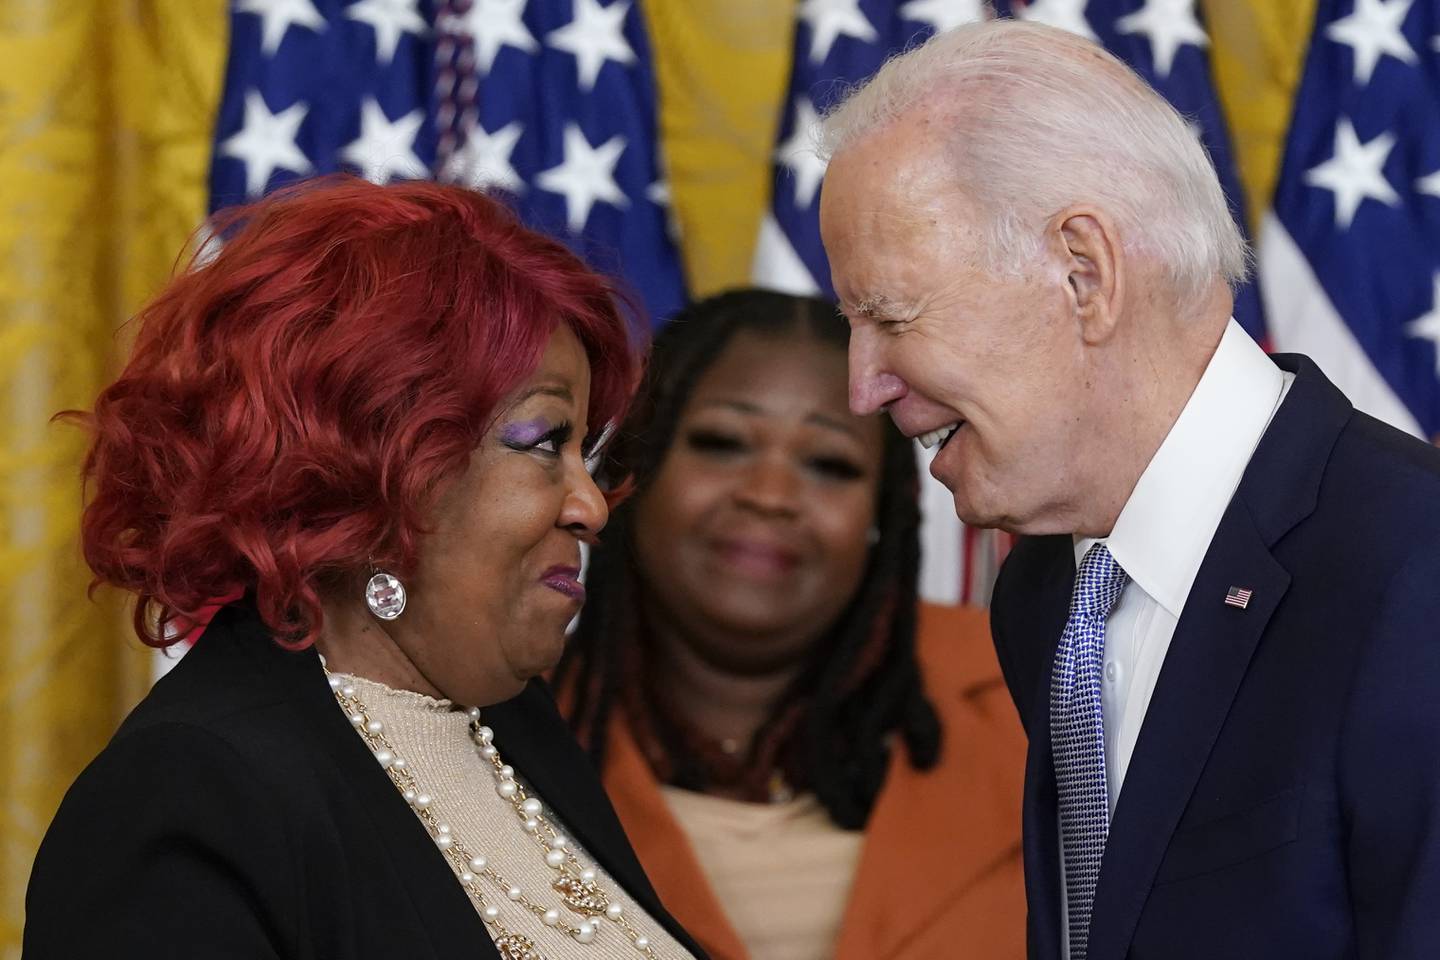 Former Georgia poll worker, Shaye Moss, centre, looks on as President Joe Biden awards the Presidential Citizens Medal to her mother Ruby Freeman during a ceremony at the White House. AP